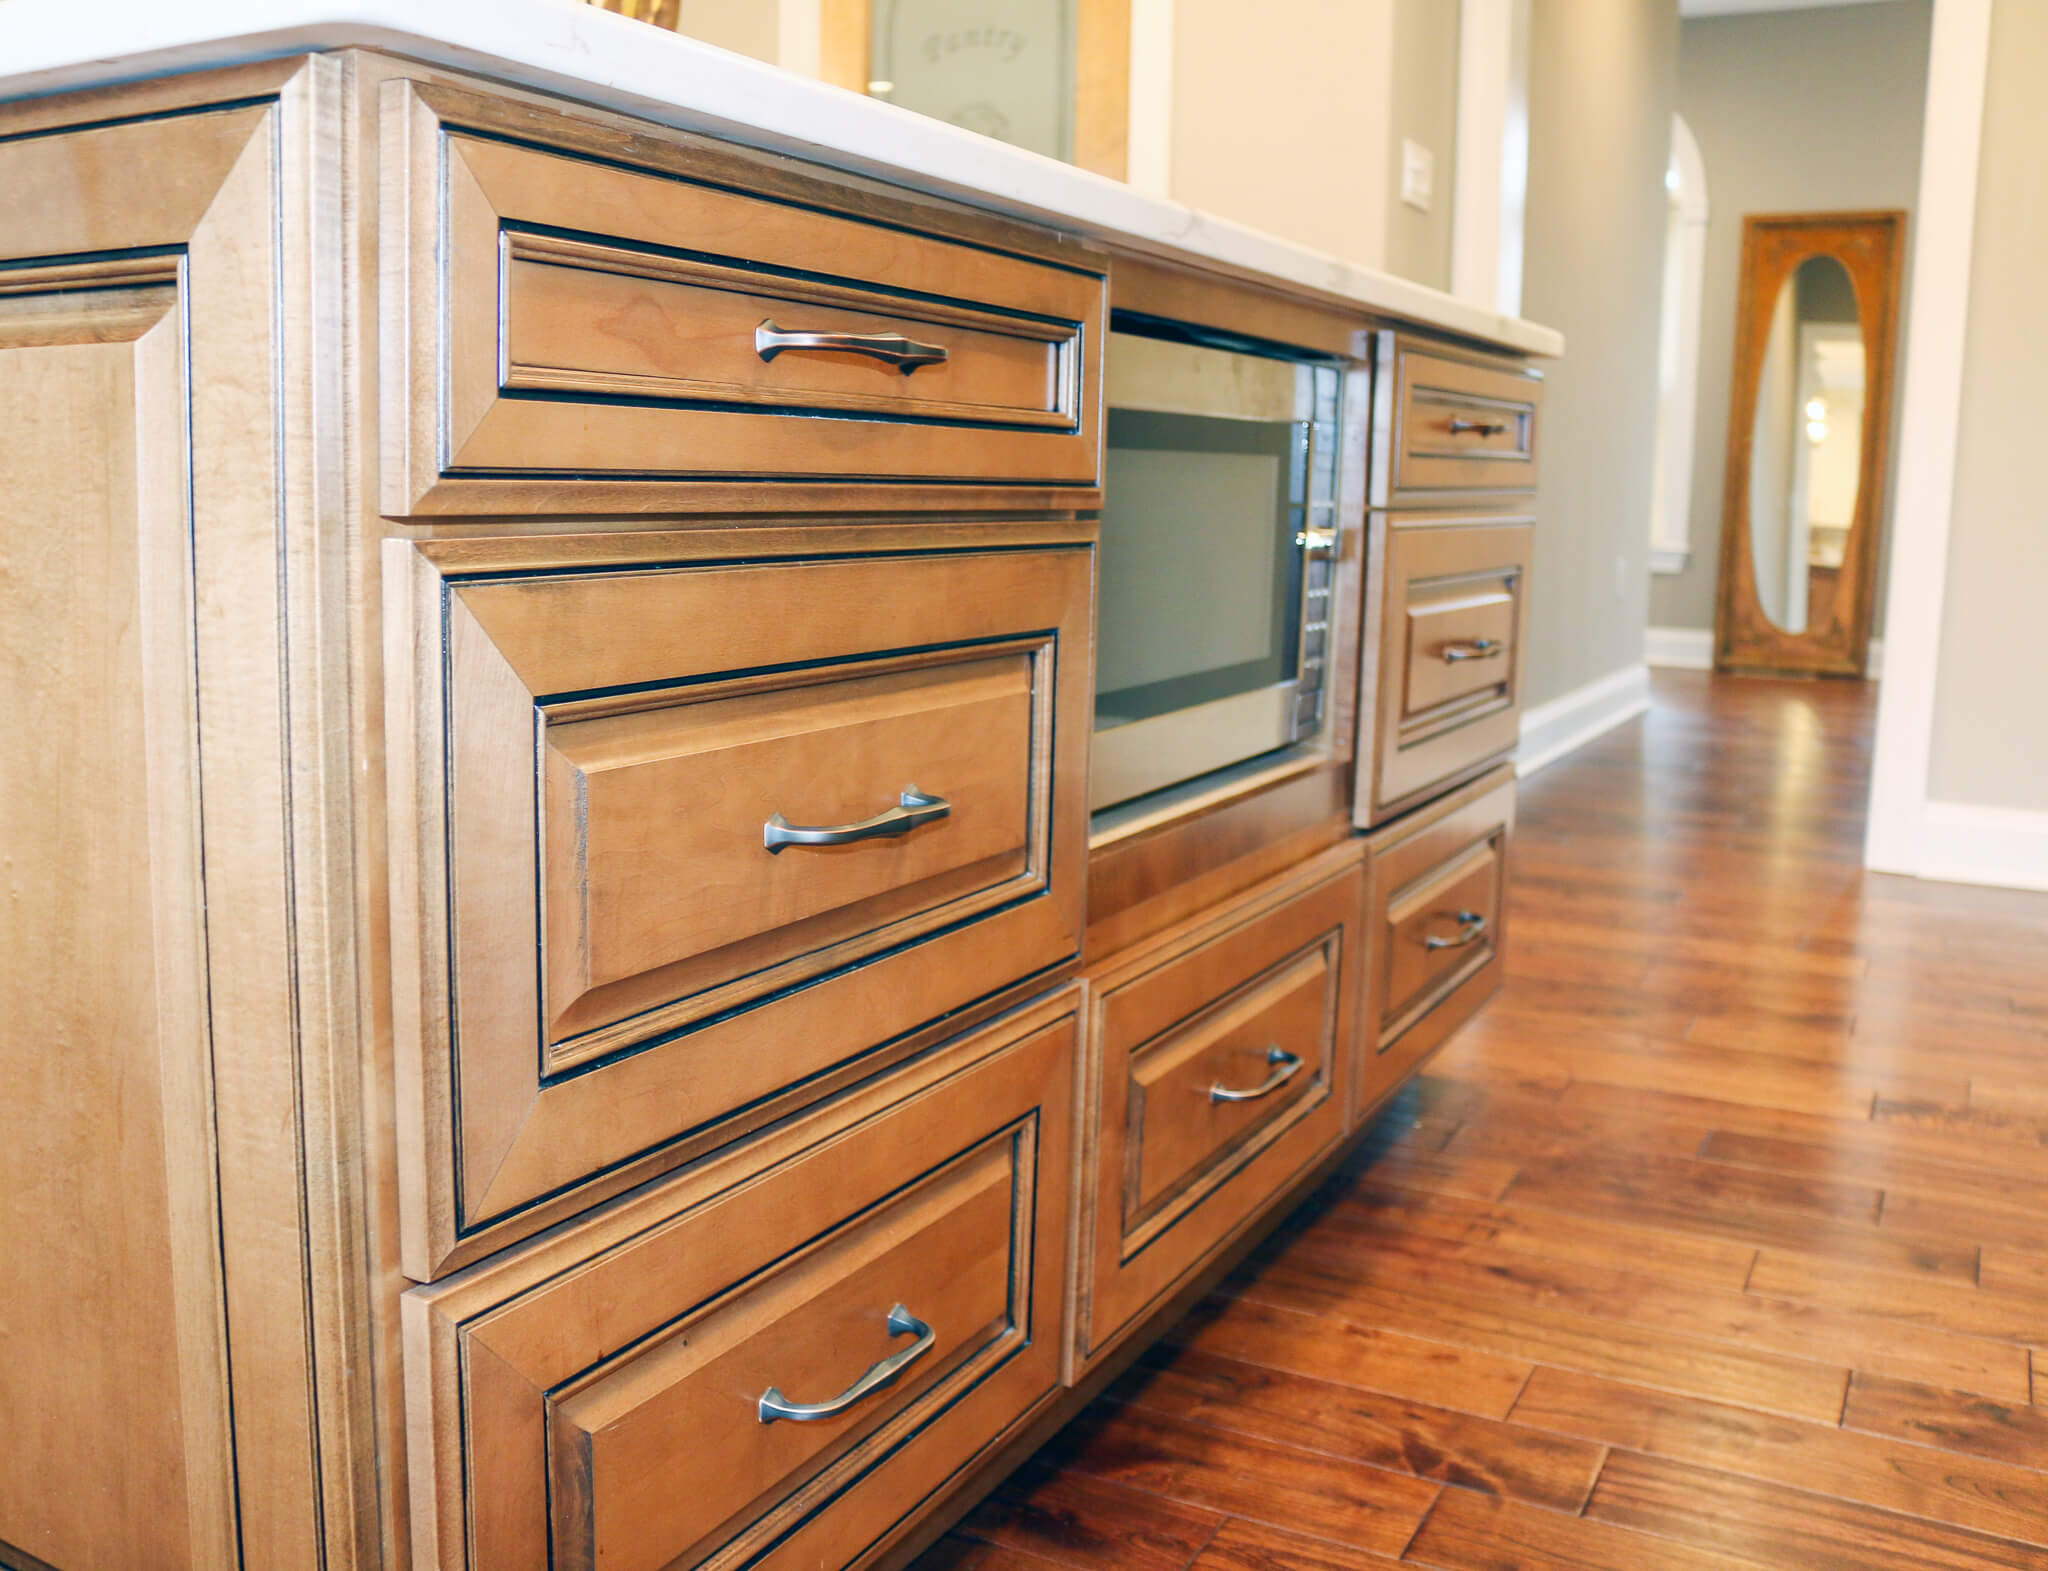 close up view of wooden cabinets